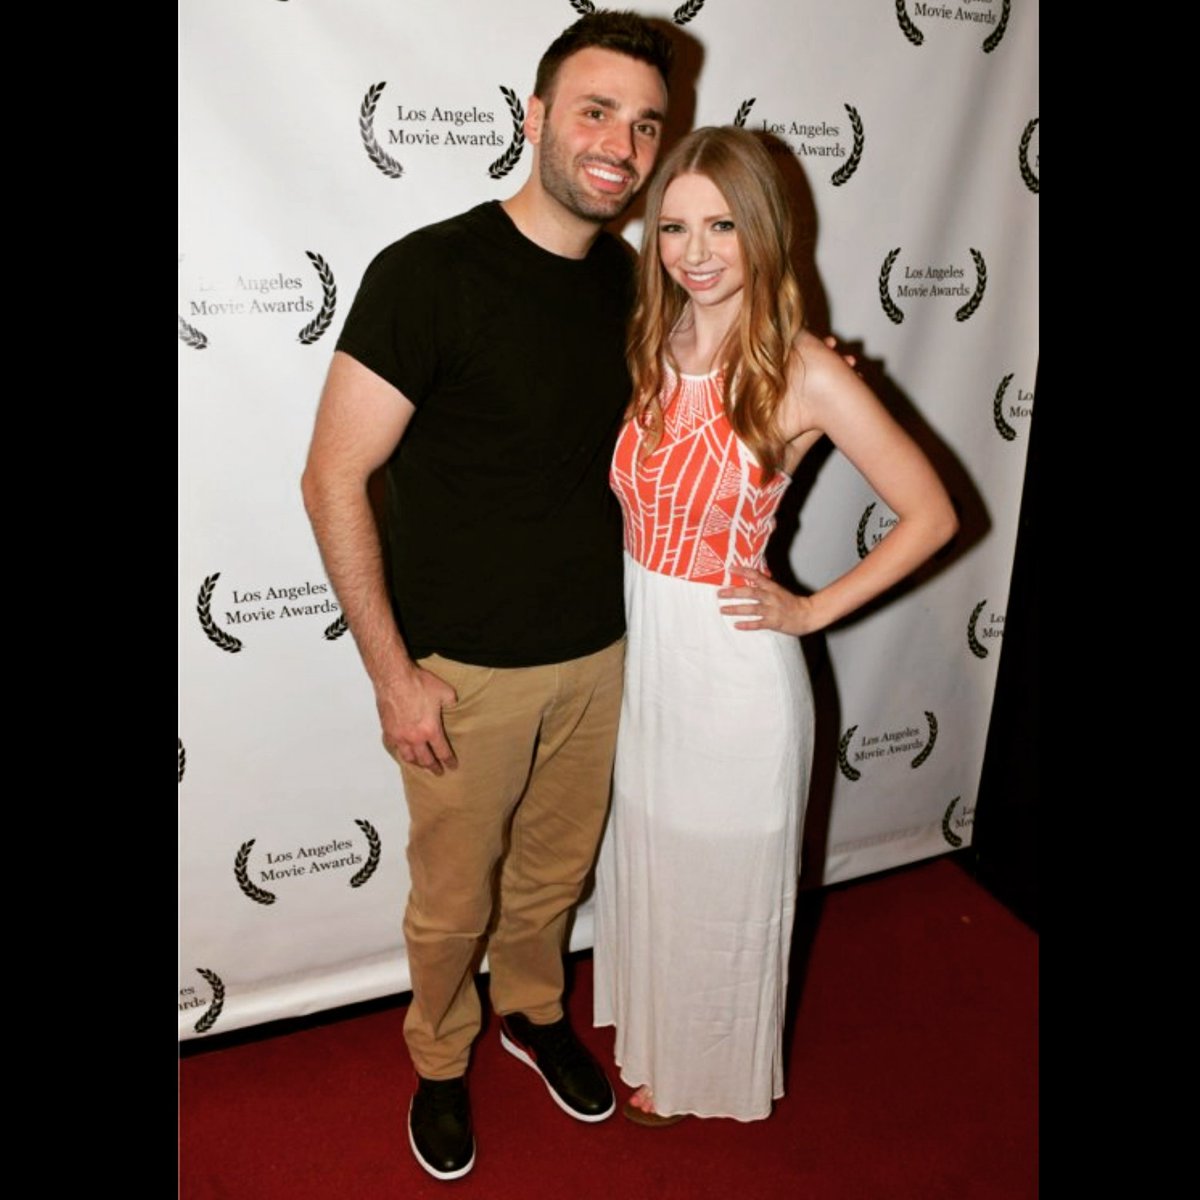 #FromJennifer won the Audience Award at the #LosAngelesMovieAwards 👏👏
@CurtisKingsley @realfrankmerle @JamesCullenB